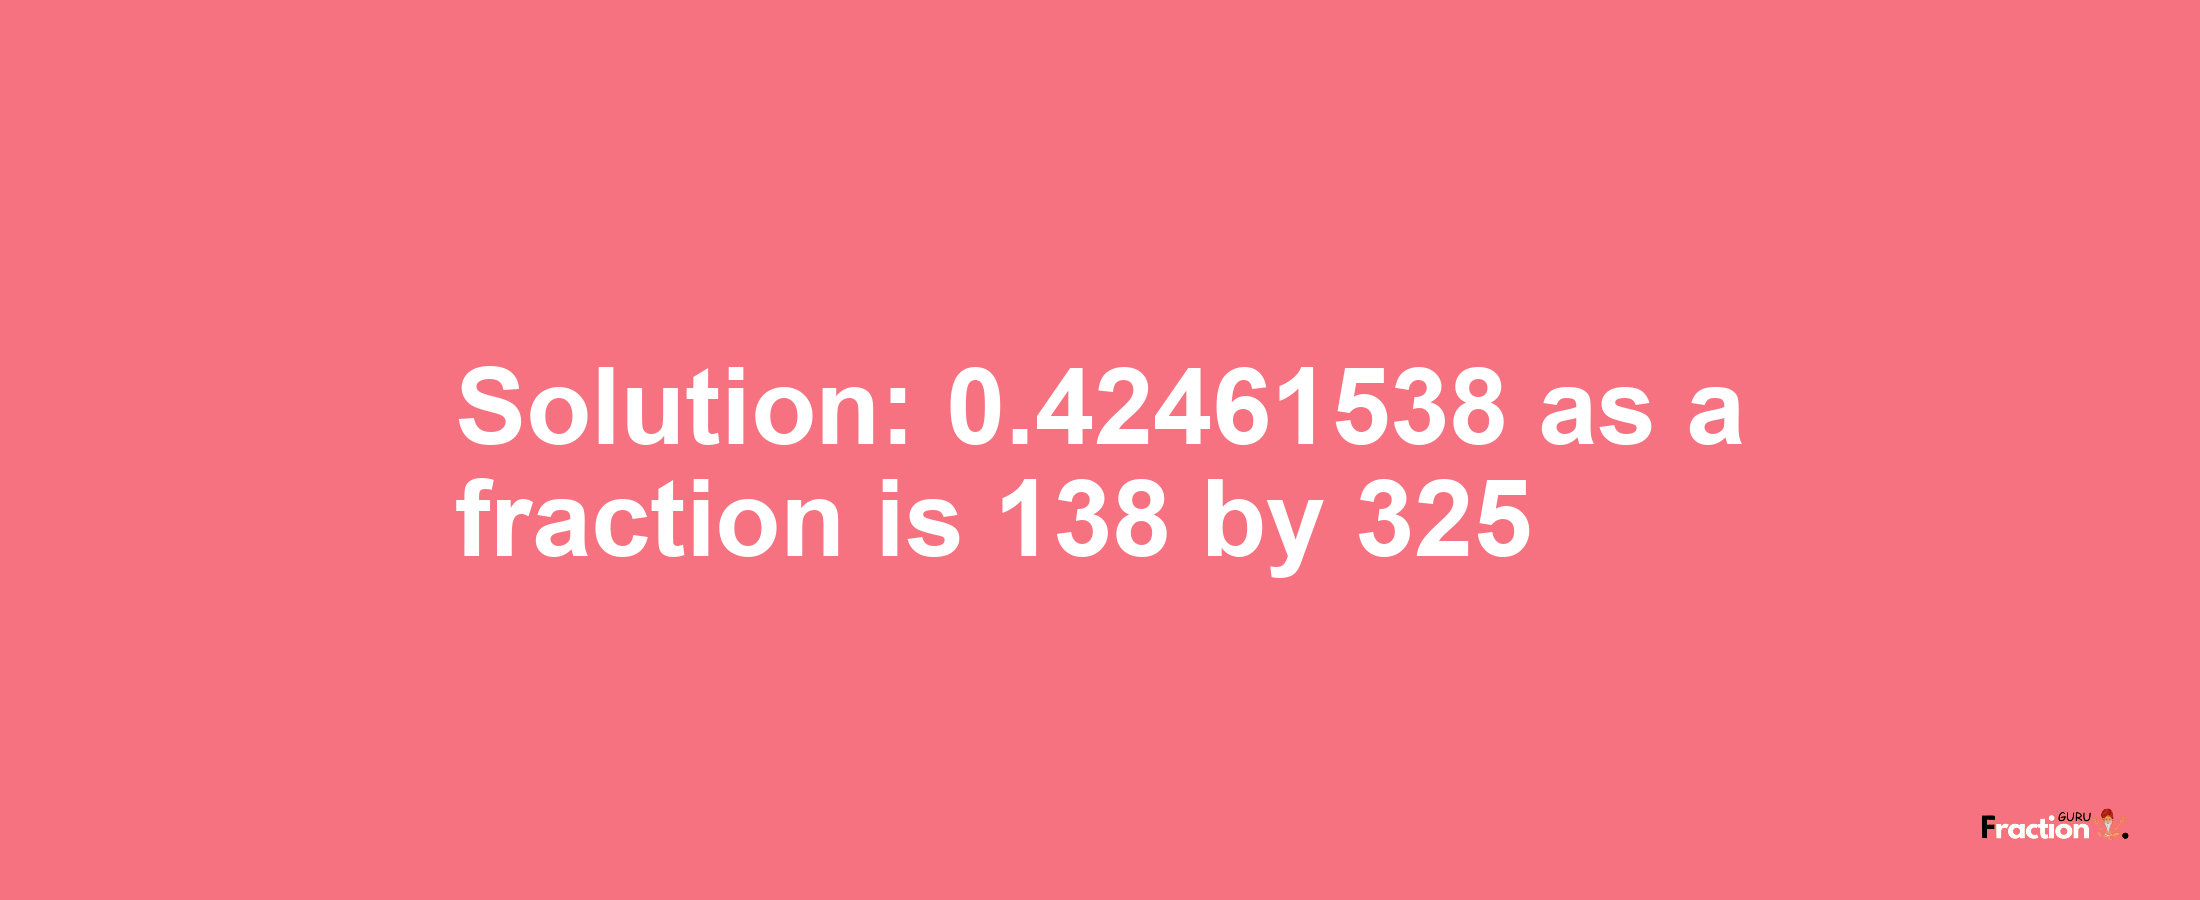 Solution:0.42461538 as a fraction is 138/325